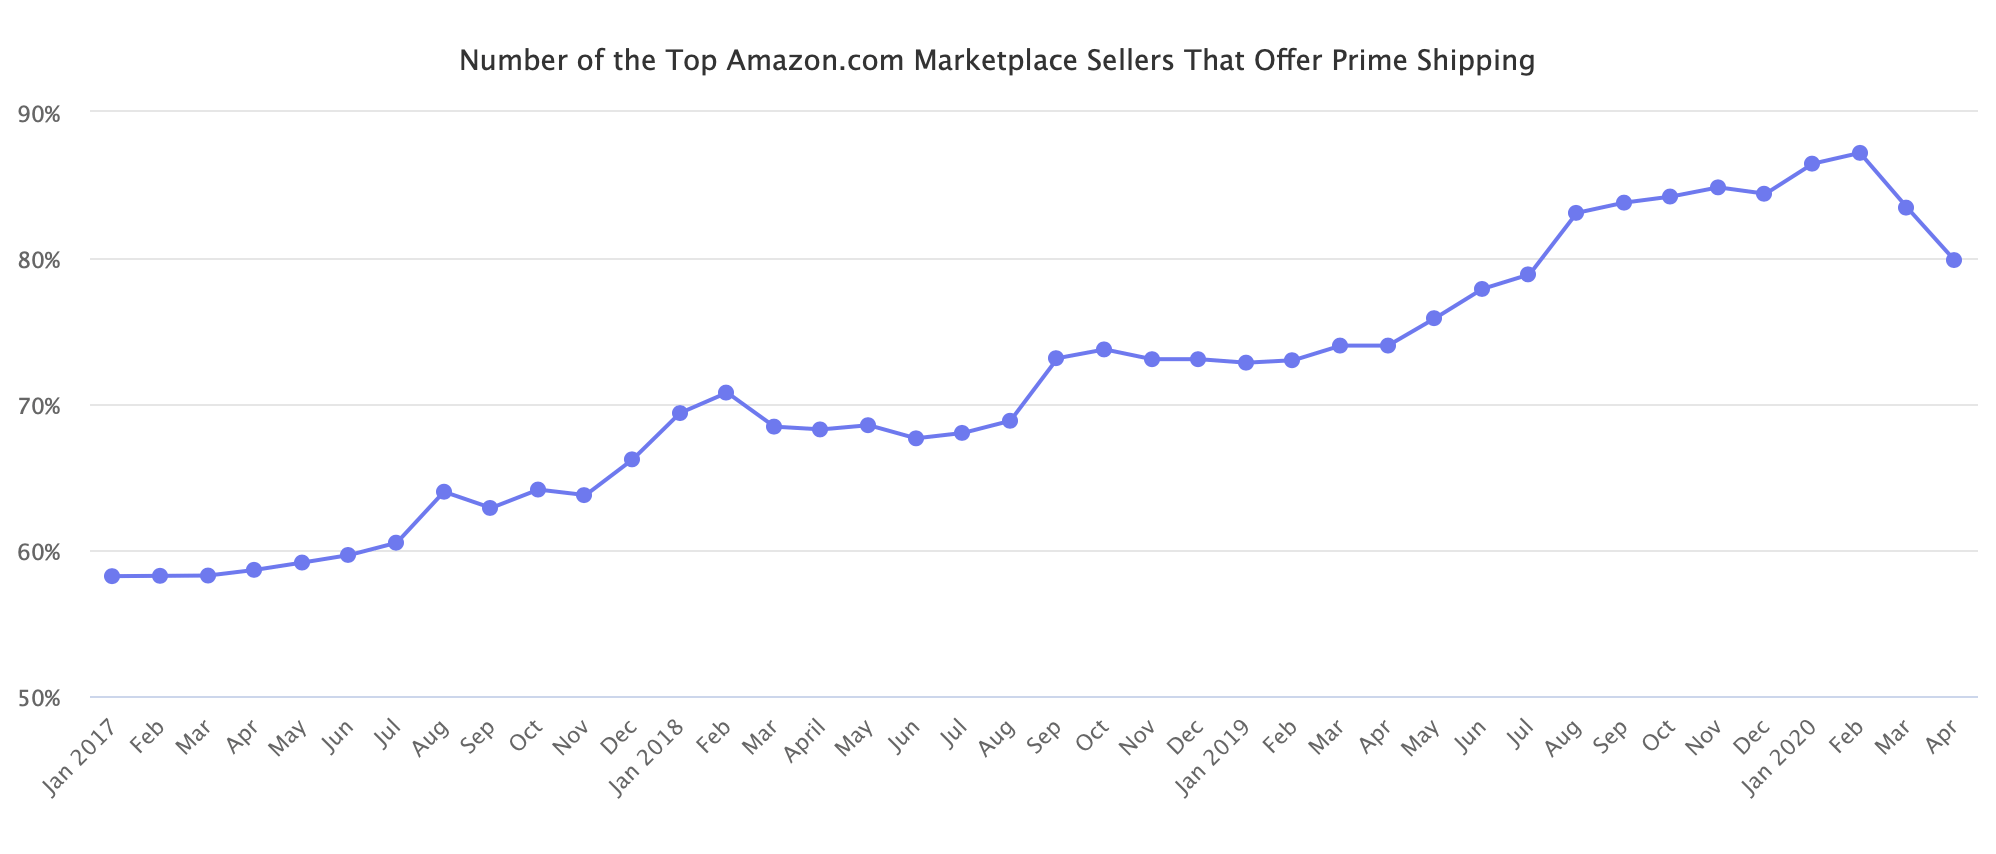 'Number of the Top Amazon.com Marketplace Sellers That Offer Prime Shipping